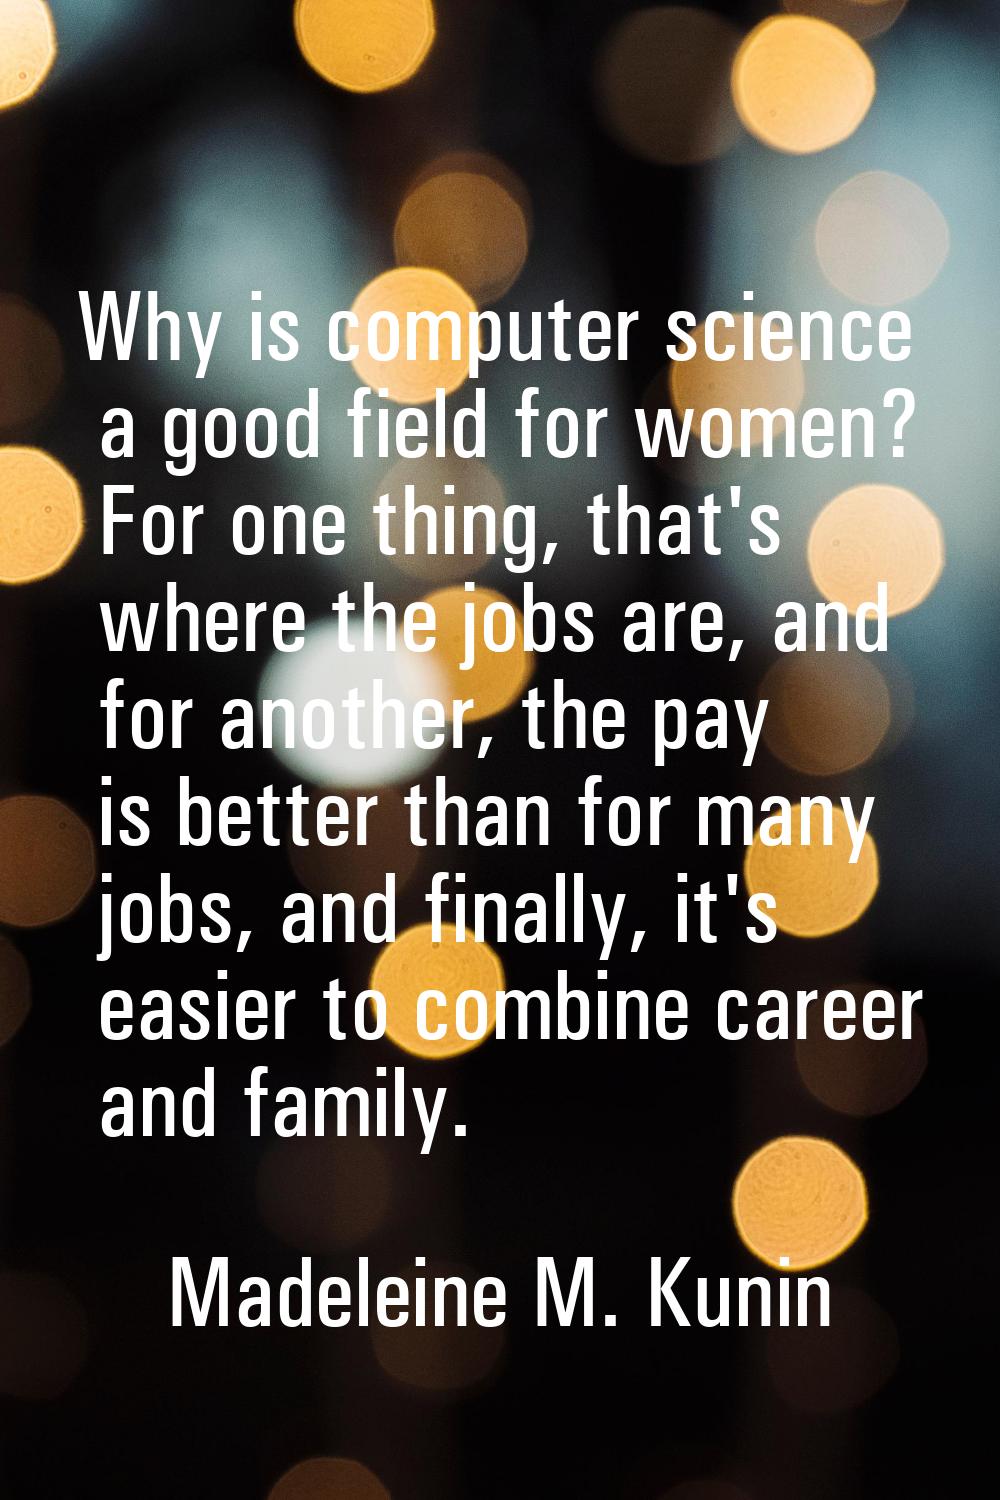 Why is computer science a good field for women? For one thing, that's where the jobs are, and for a